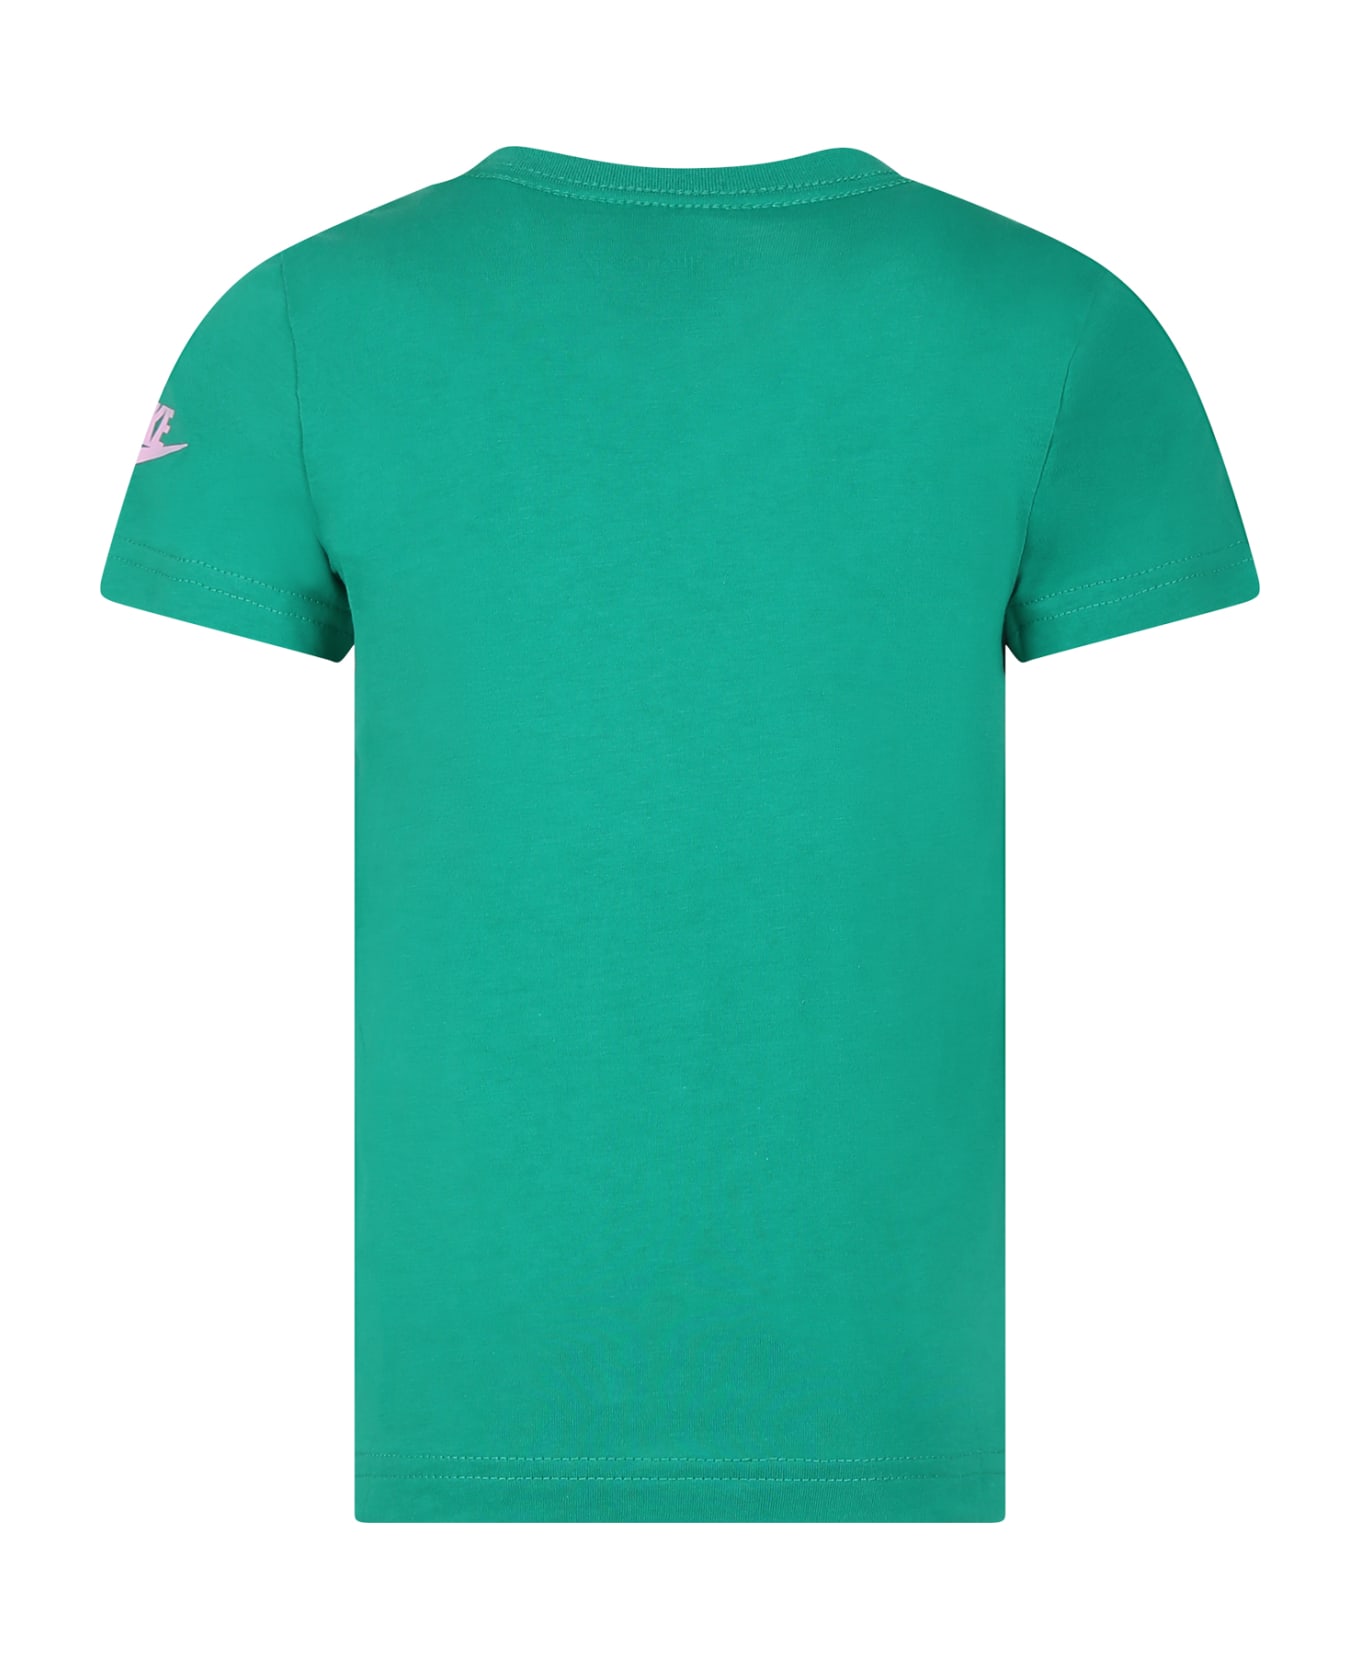 Nike Green T-shirt For Boy With Logo And Swoosh - Green